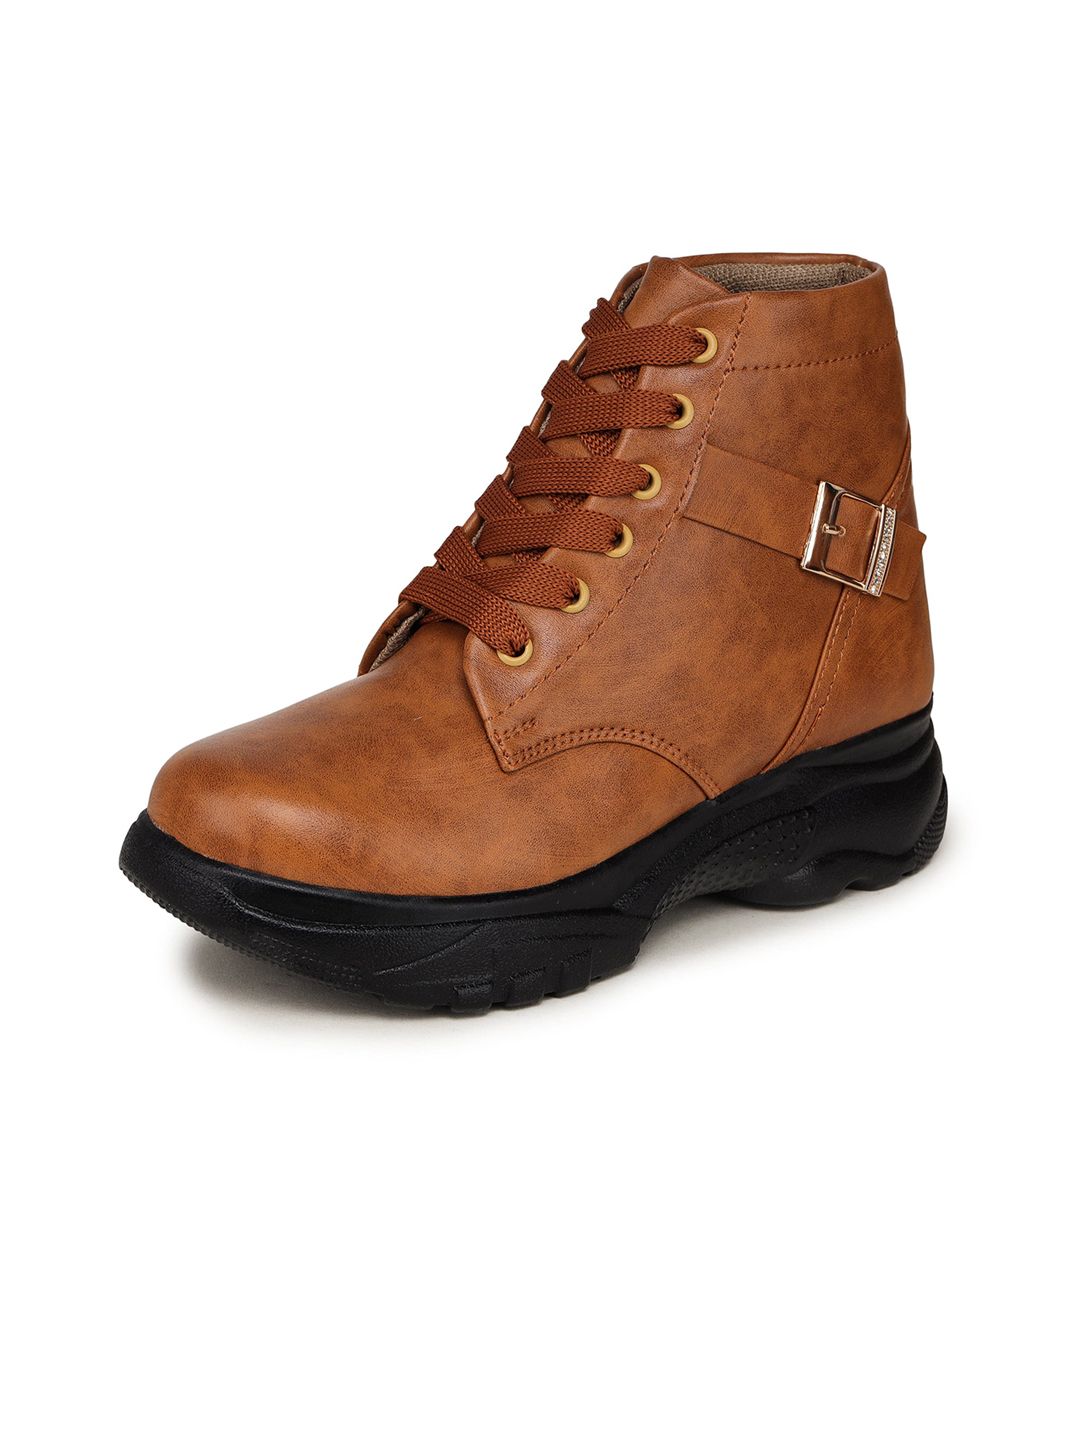 BOOTCO Women Tan Brown Solid Casual Regular Boots Price in India